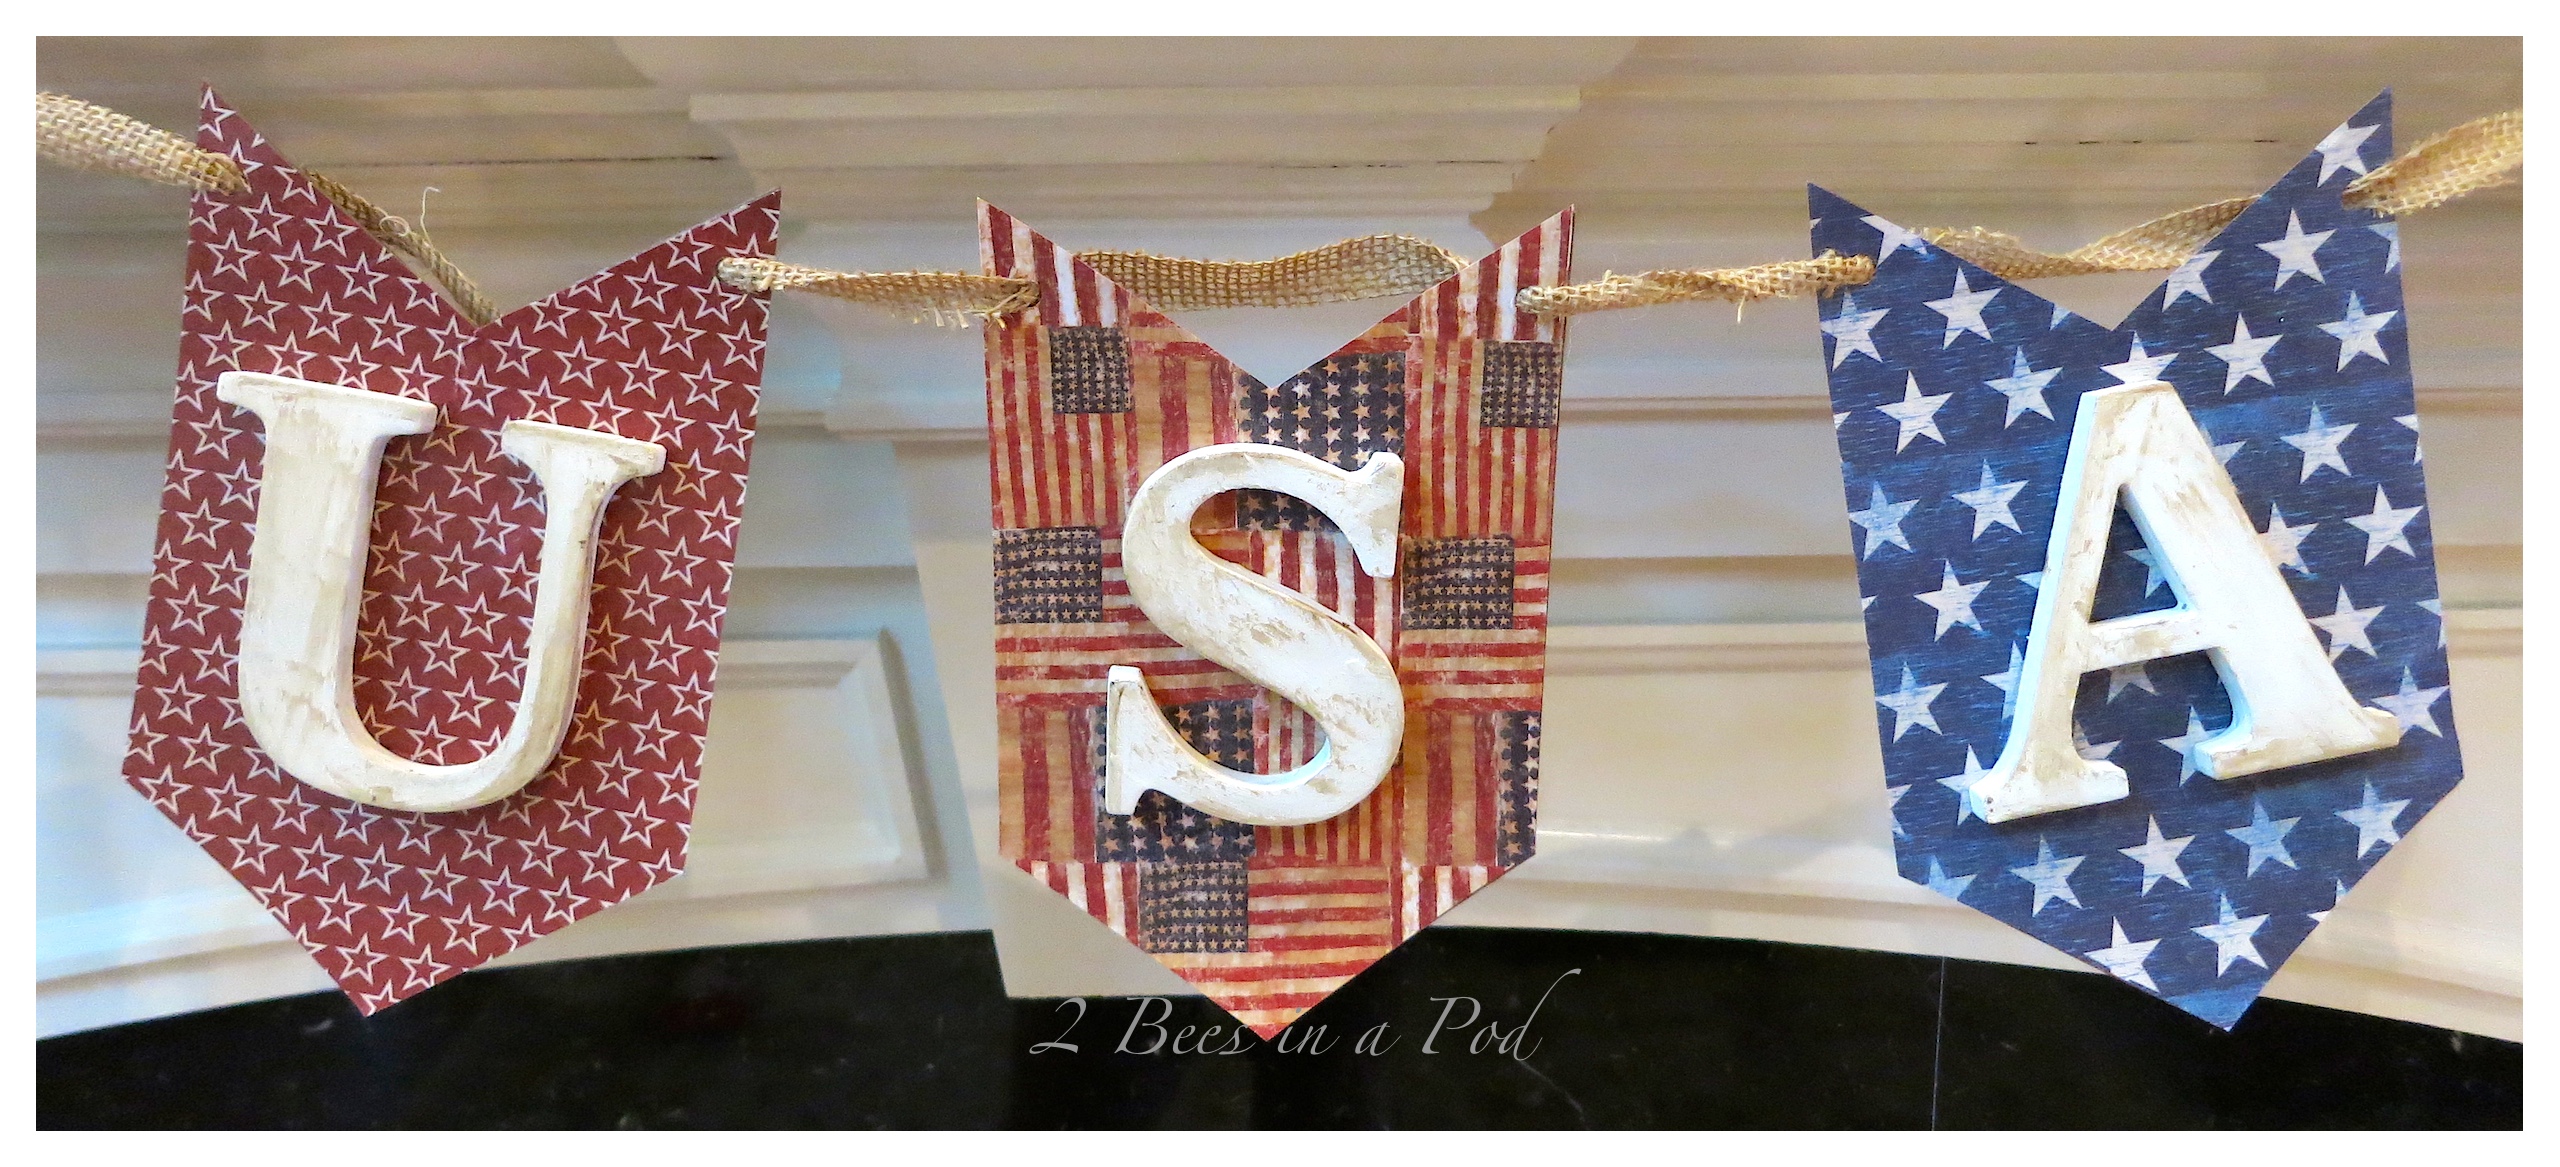 DIY red, white and blue USA banner. Added burlap and muslin for a vintage, rustic look.